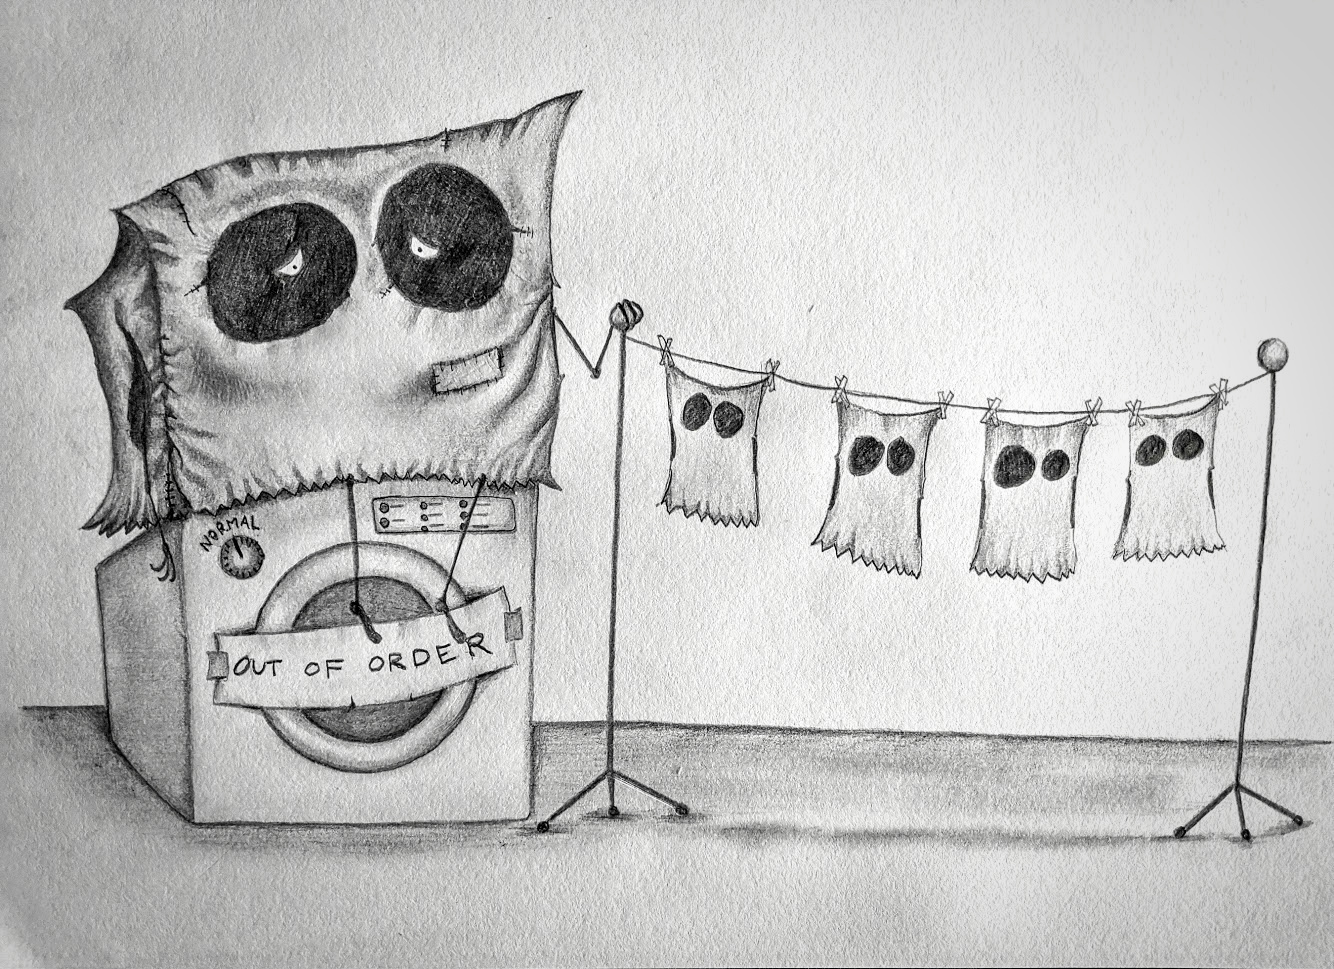 IMAGE: An anthropomorphic paper bag sits on a dryer with an "Out of Order" sign taped over the front. Next to the dryer is a clothesline holding four empty paper bags that appear far too small to fit on the anthropomorphic creature.